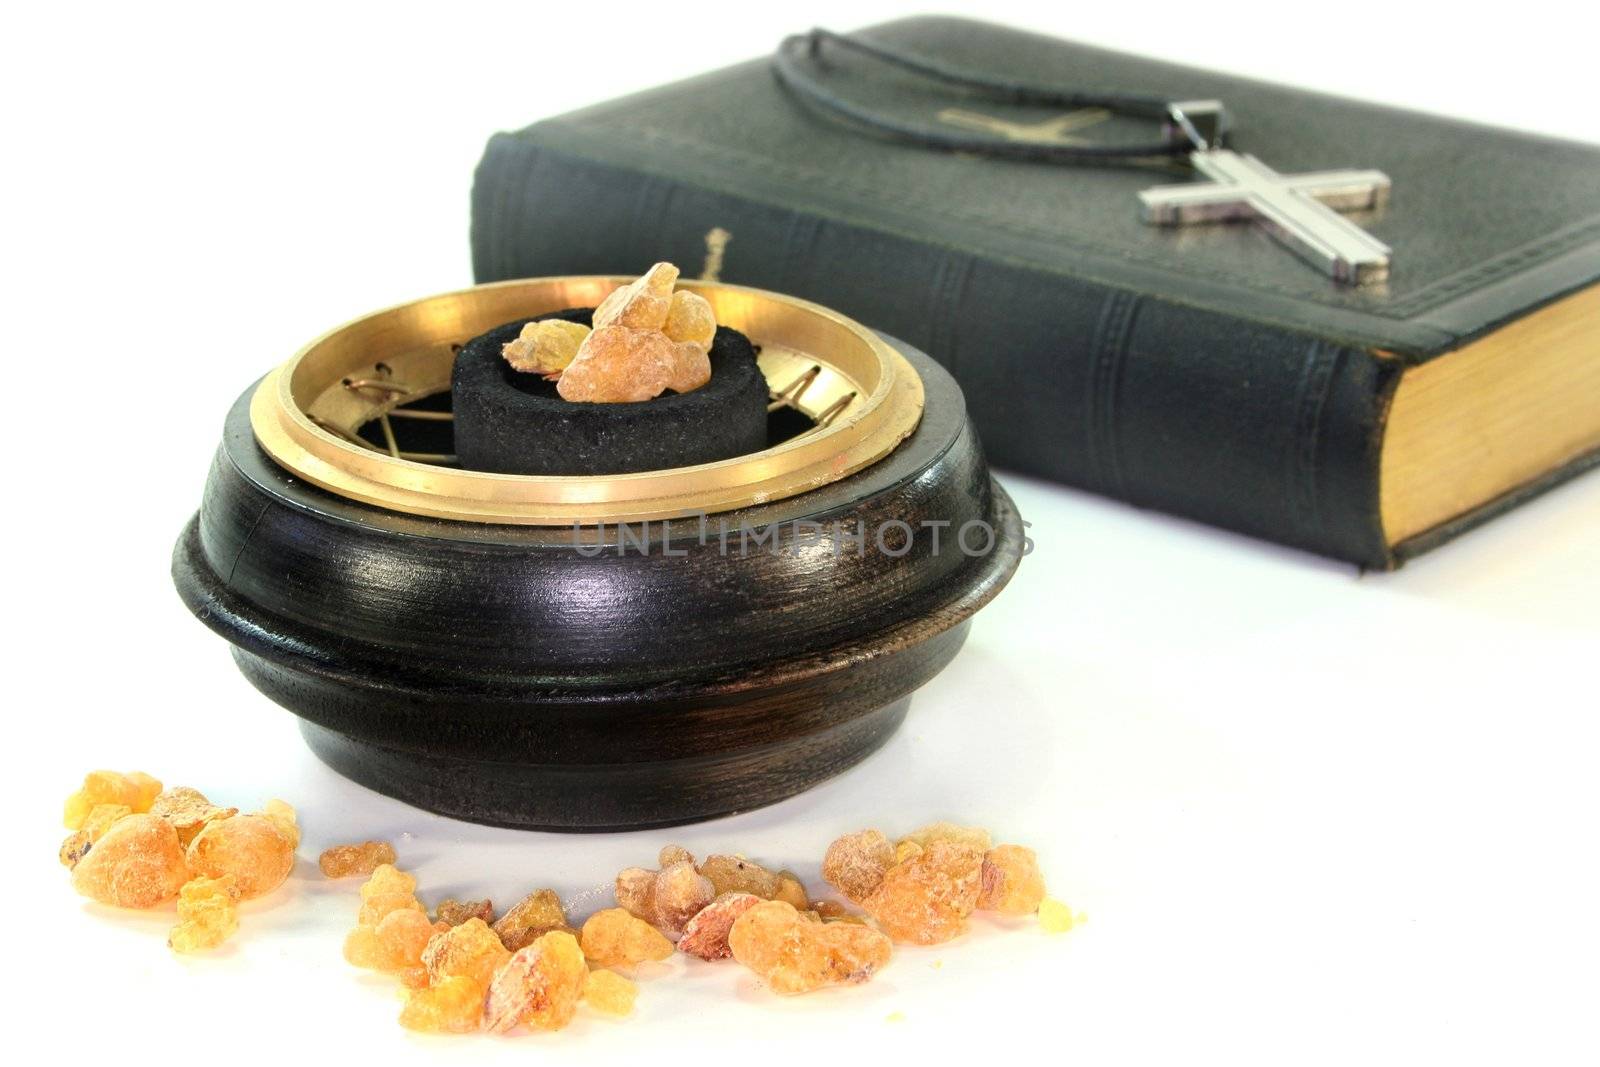 Incense bowl and song book in front of white background
